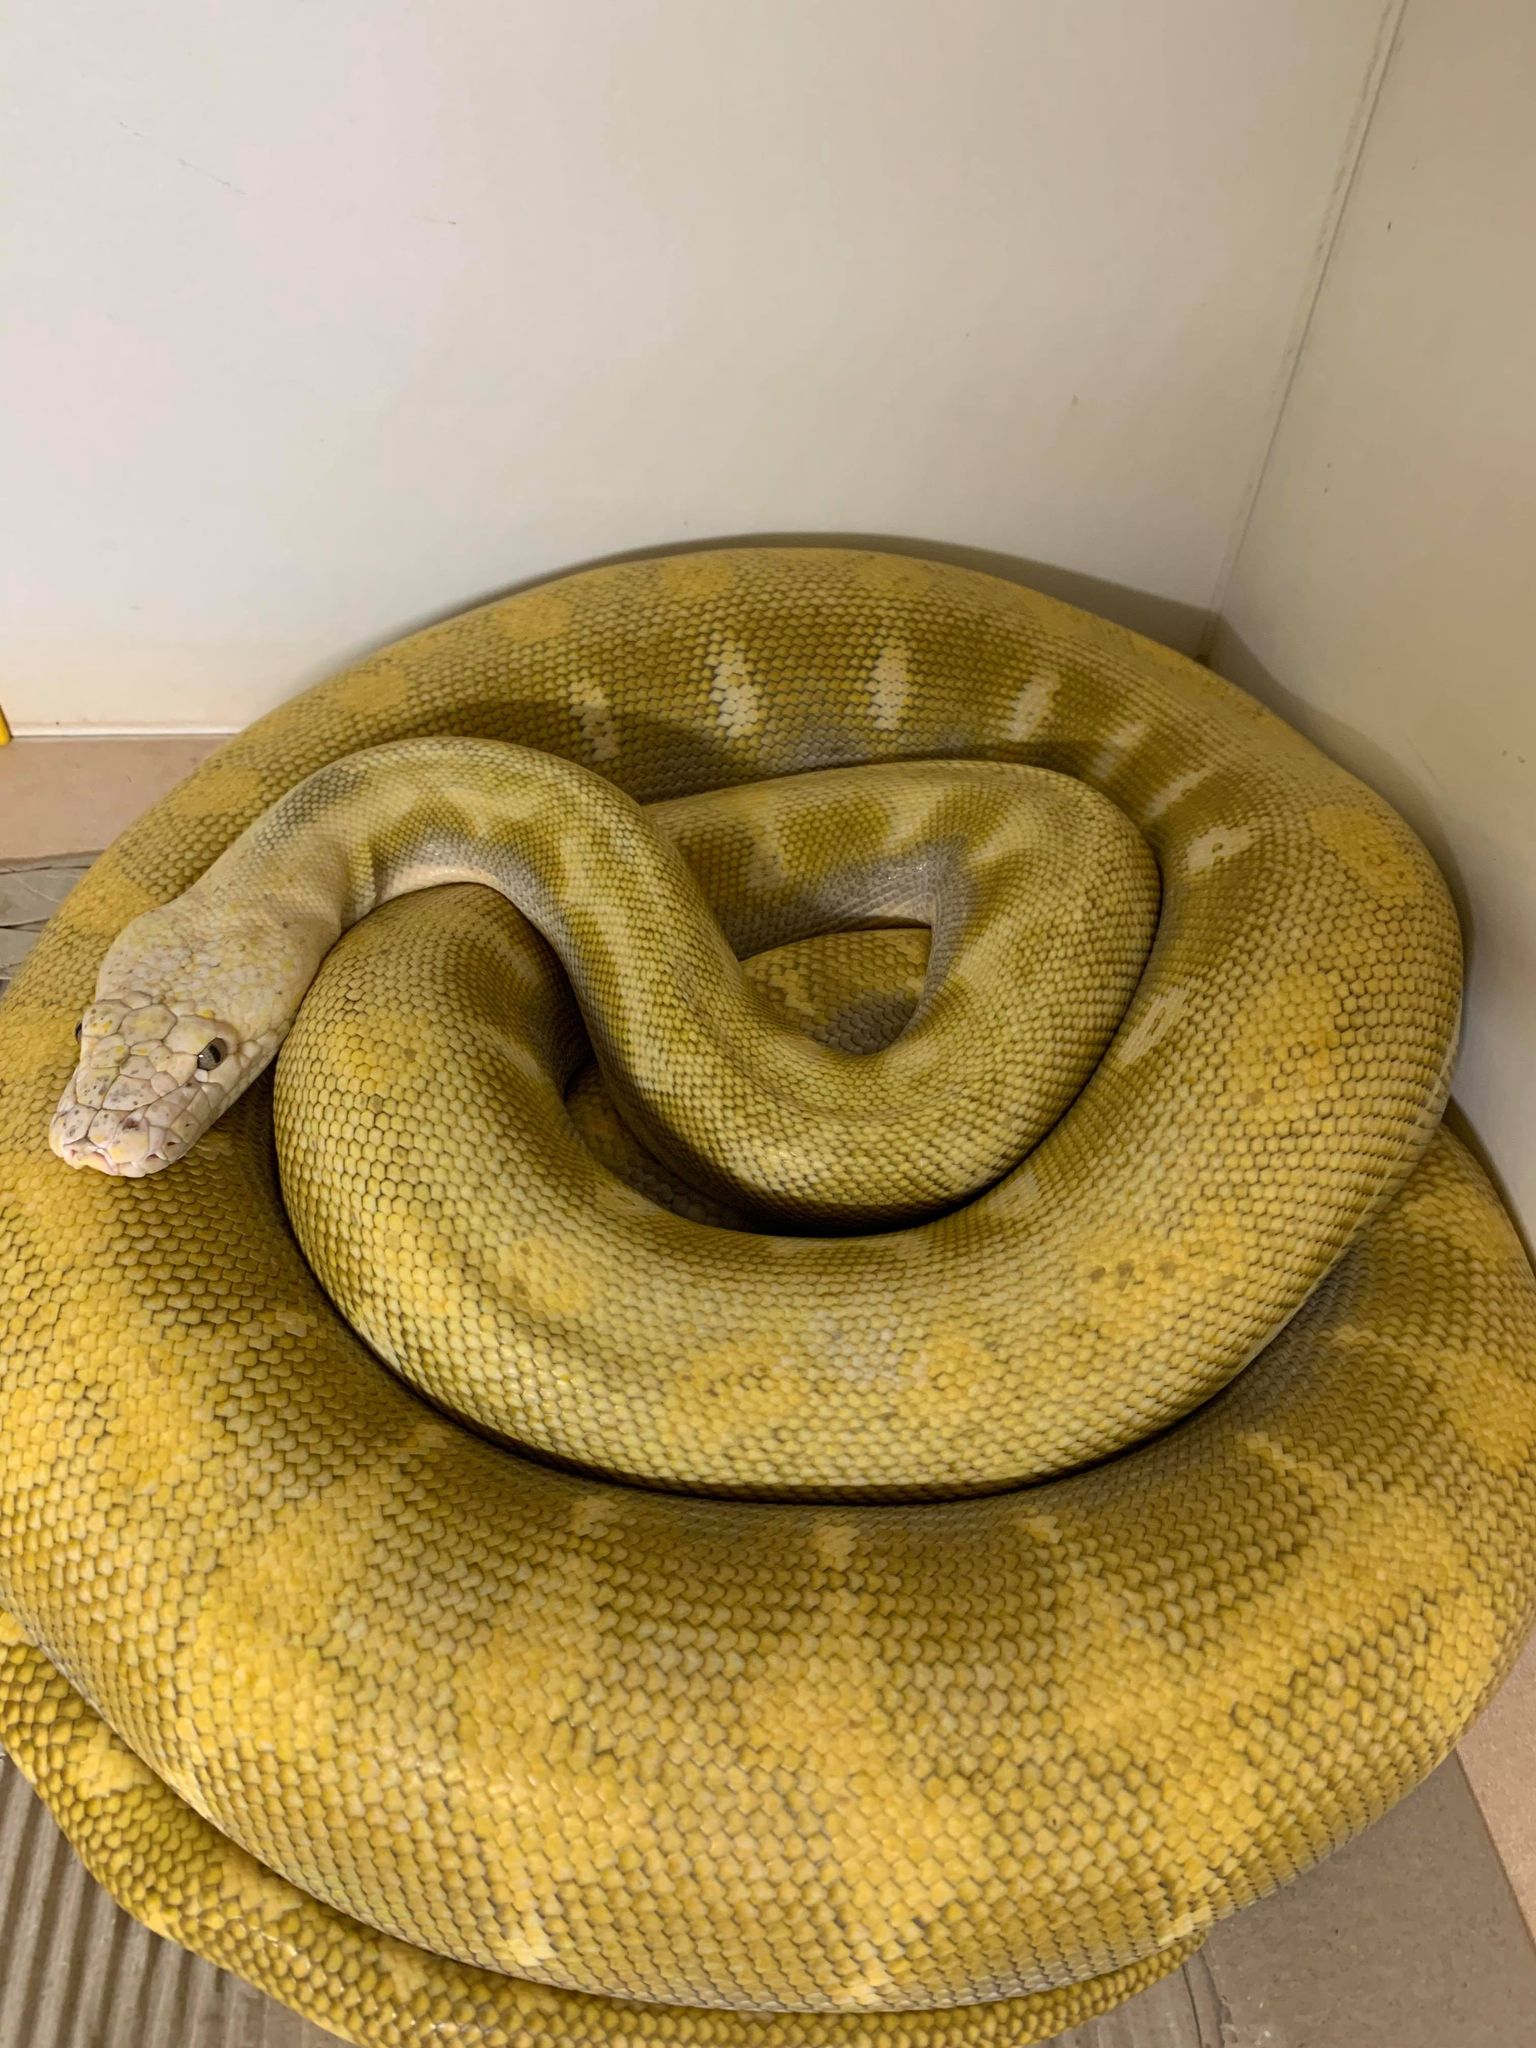 Super Bacan Reticulated Python by Pied Pythons